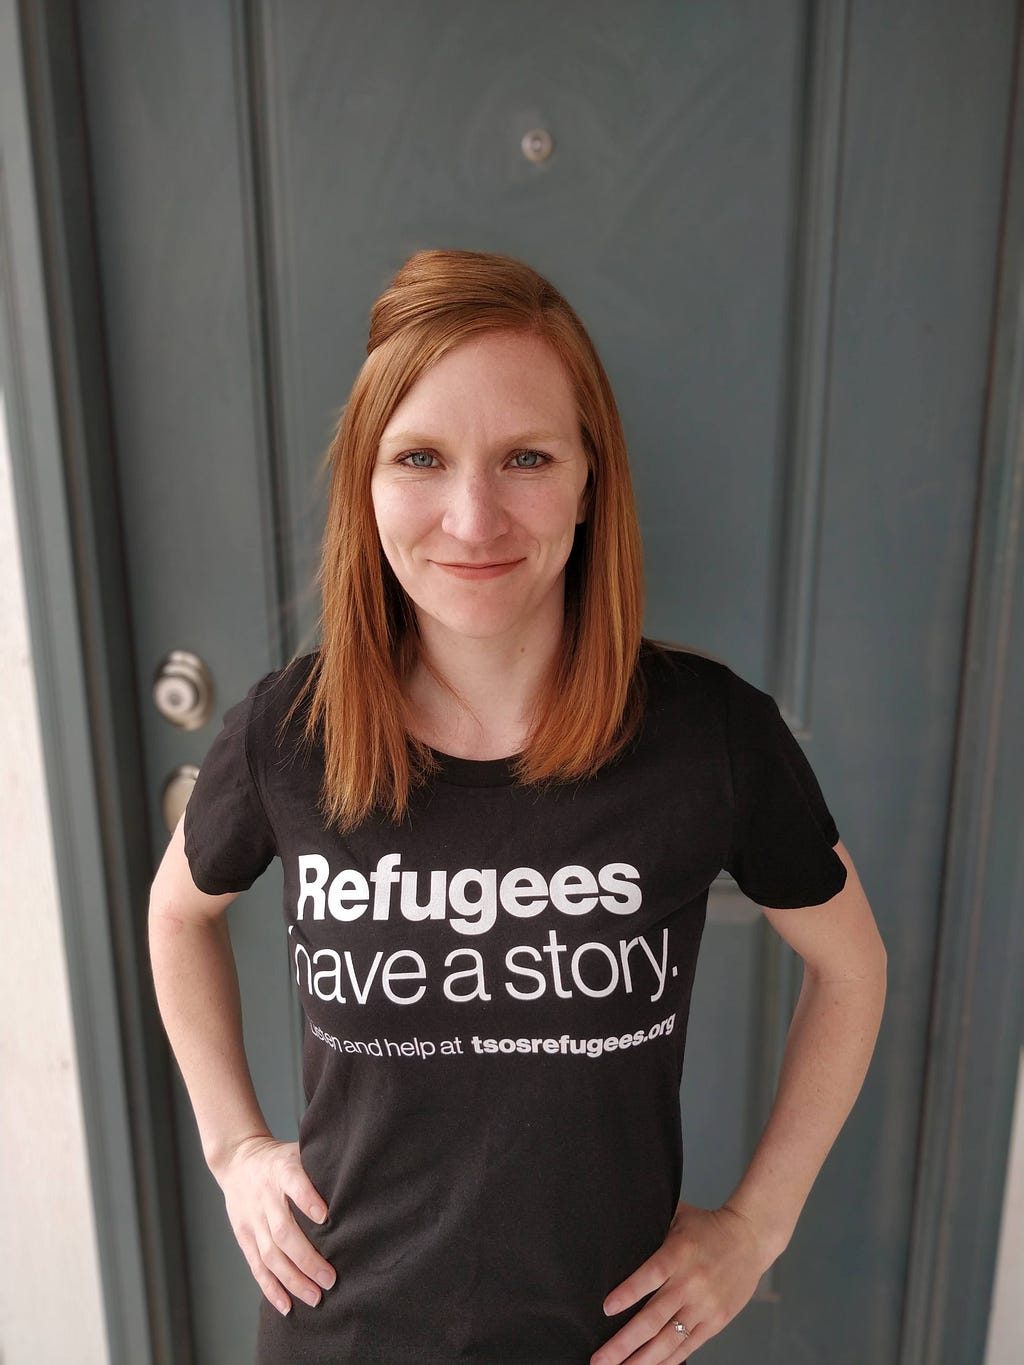 Veronika wearing a black shirt with white letters that read, “Refugees have a story.